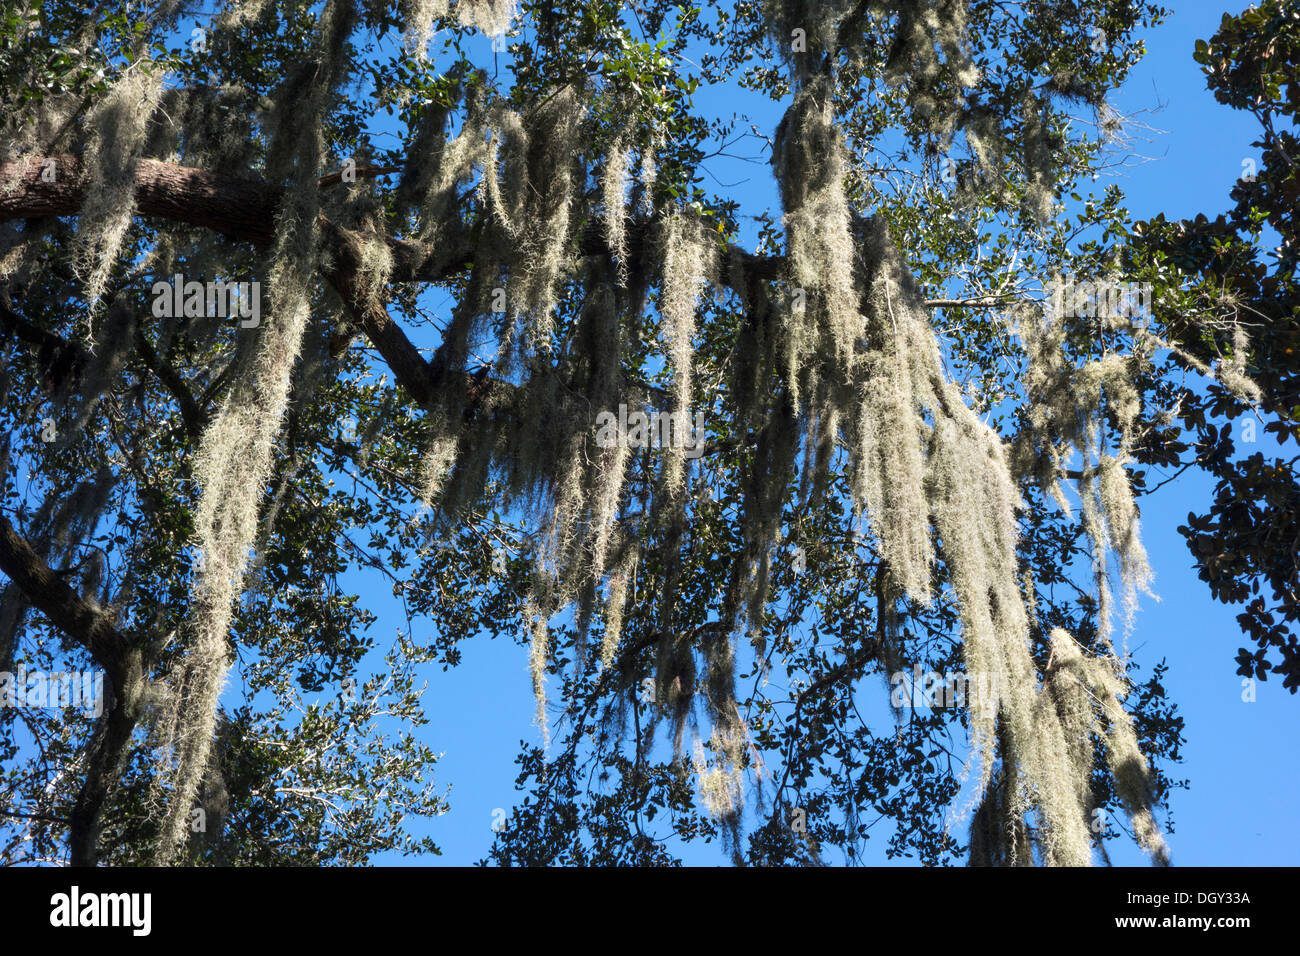 Spanish moss (Tillandsia usneoides) on a Southern Live Oak in Central Florida, USA Stock Photo